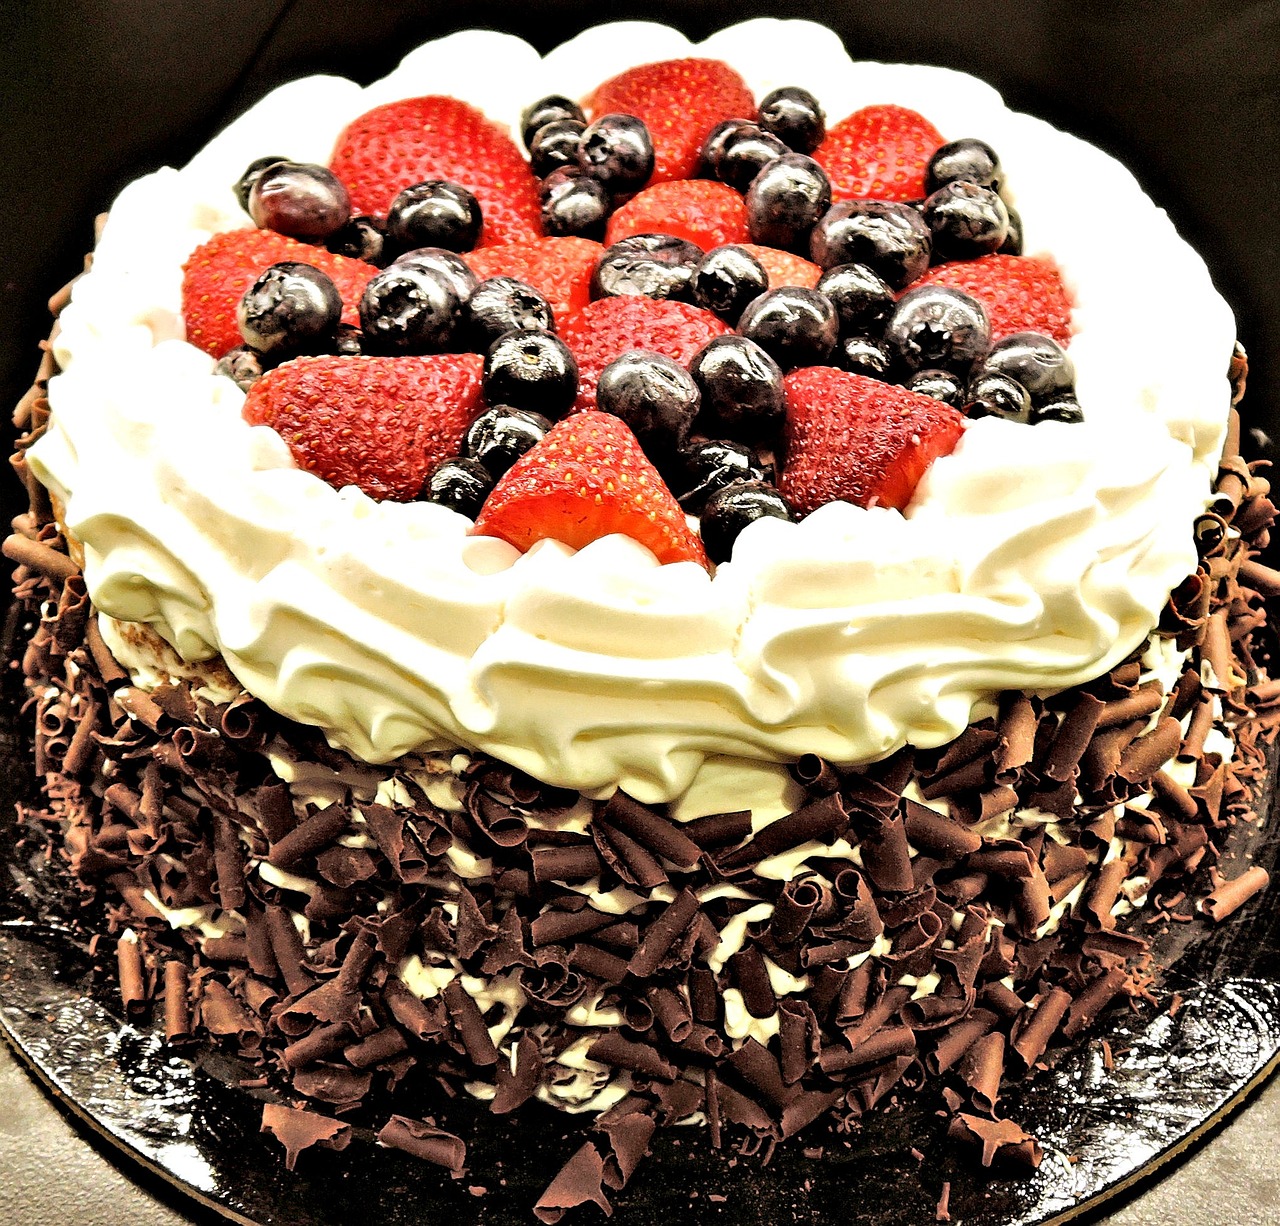 a chocolate cake with strawberries and blueberries on top, renaissance, very high contrast, happy birthday, black forest, whipped cream on top